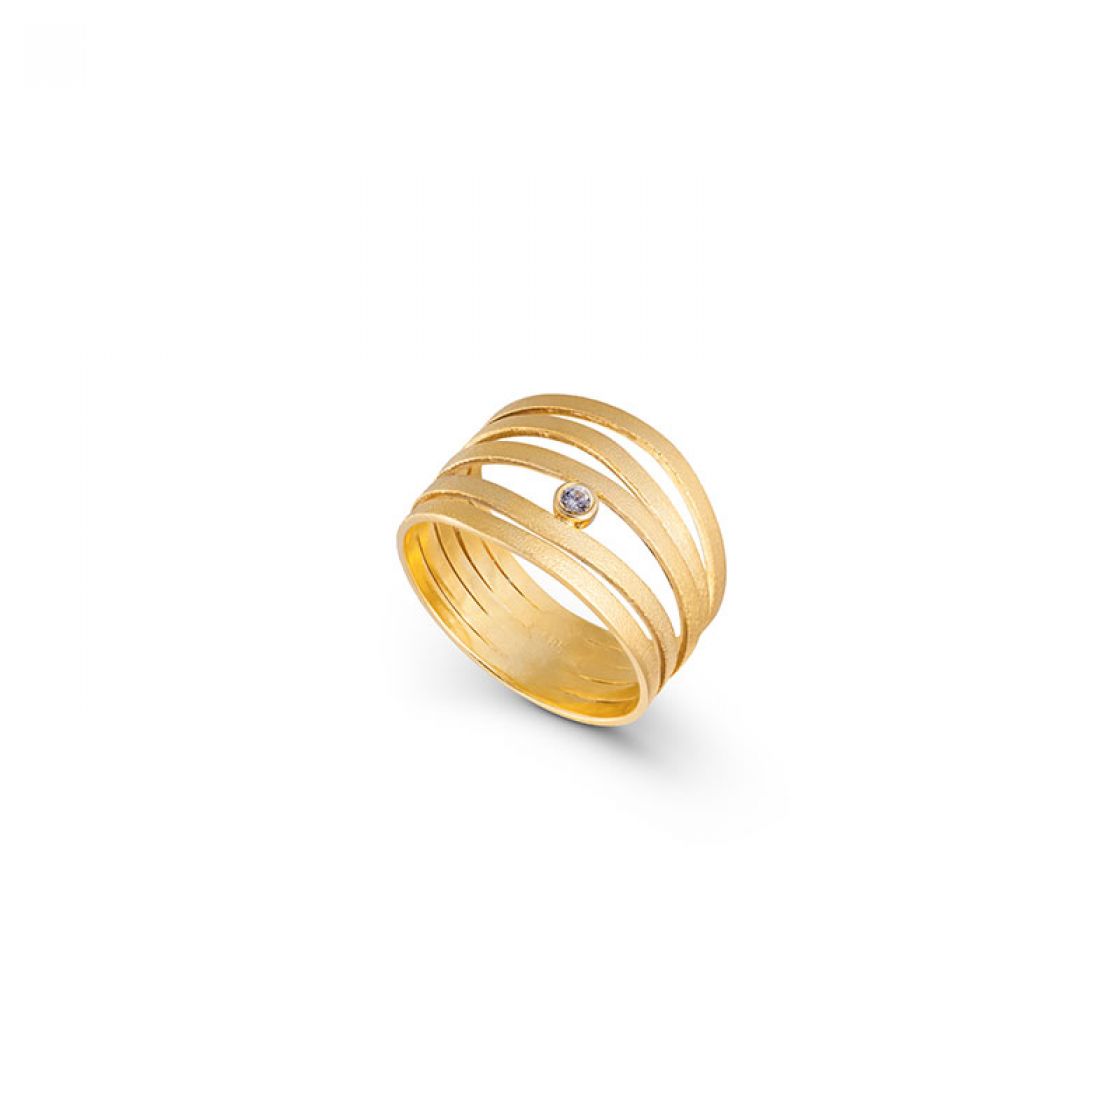 Simple and elegant ring with five asymmetrical  bands accented with a white bezel set zircon stone in 14k gold